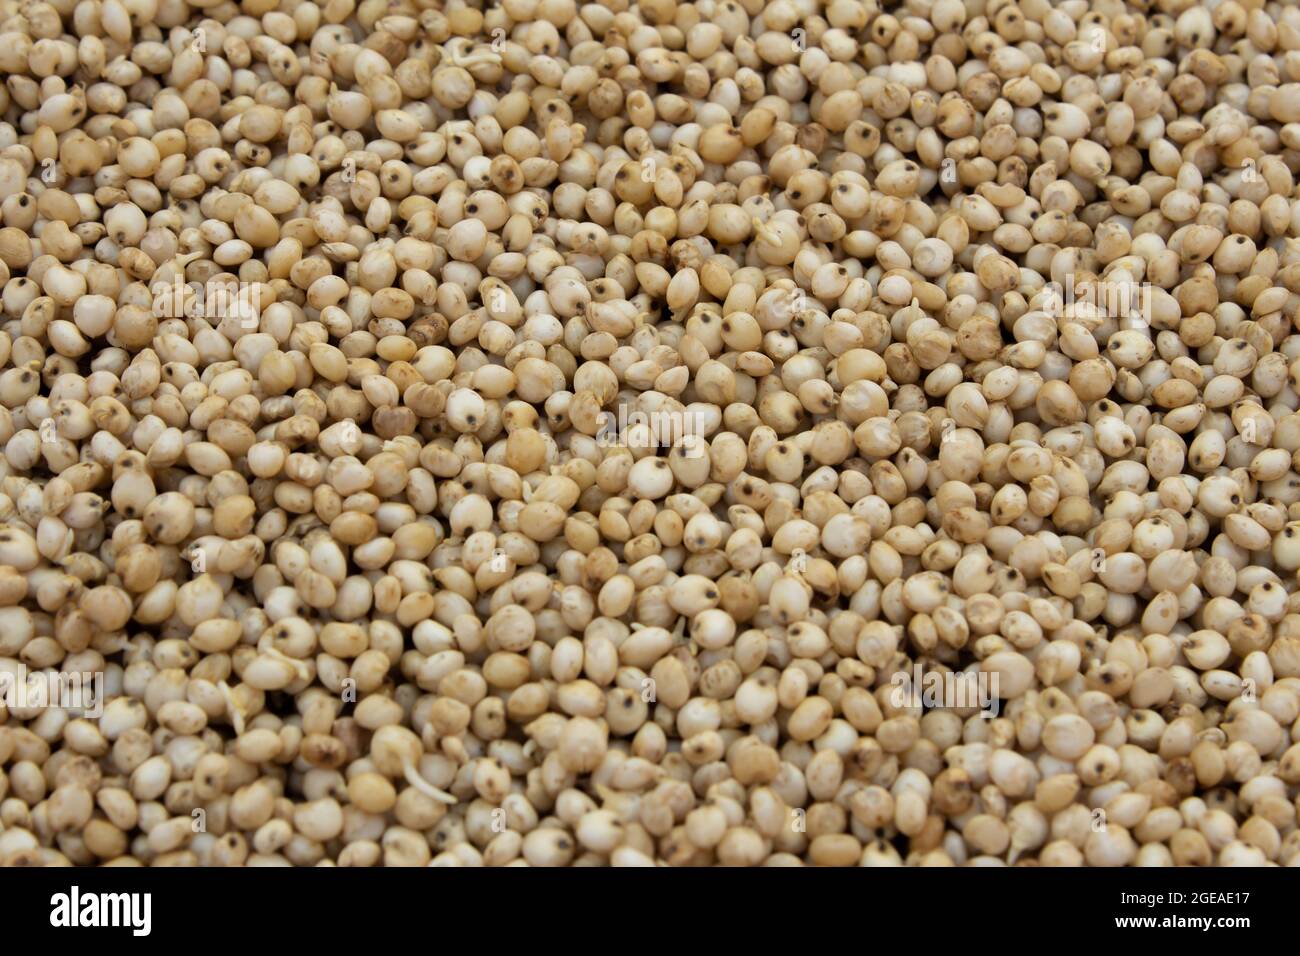 View of proso millet (also known as common millet) which is a food rich in protein Stock Photo